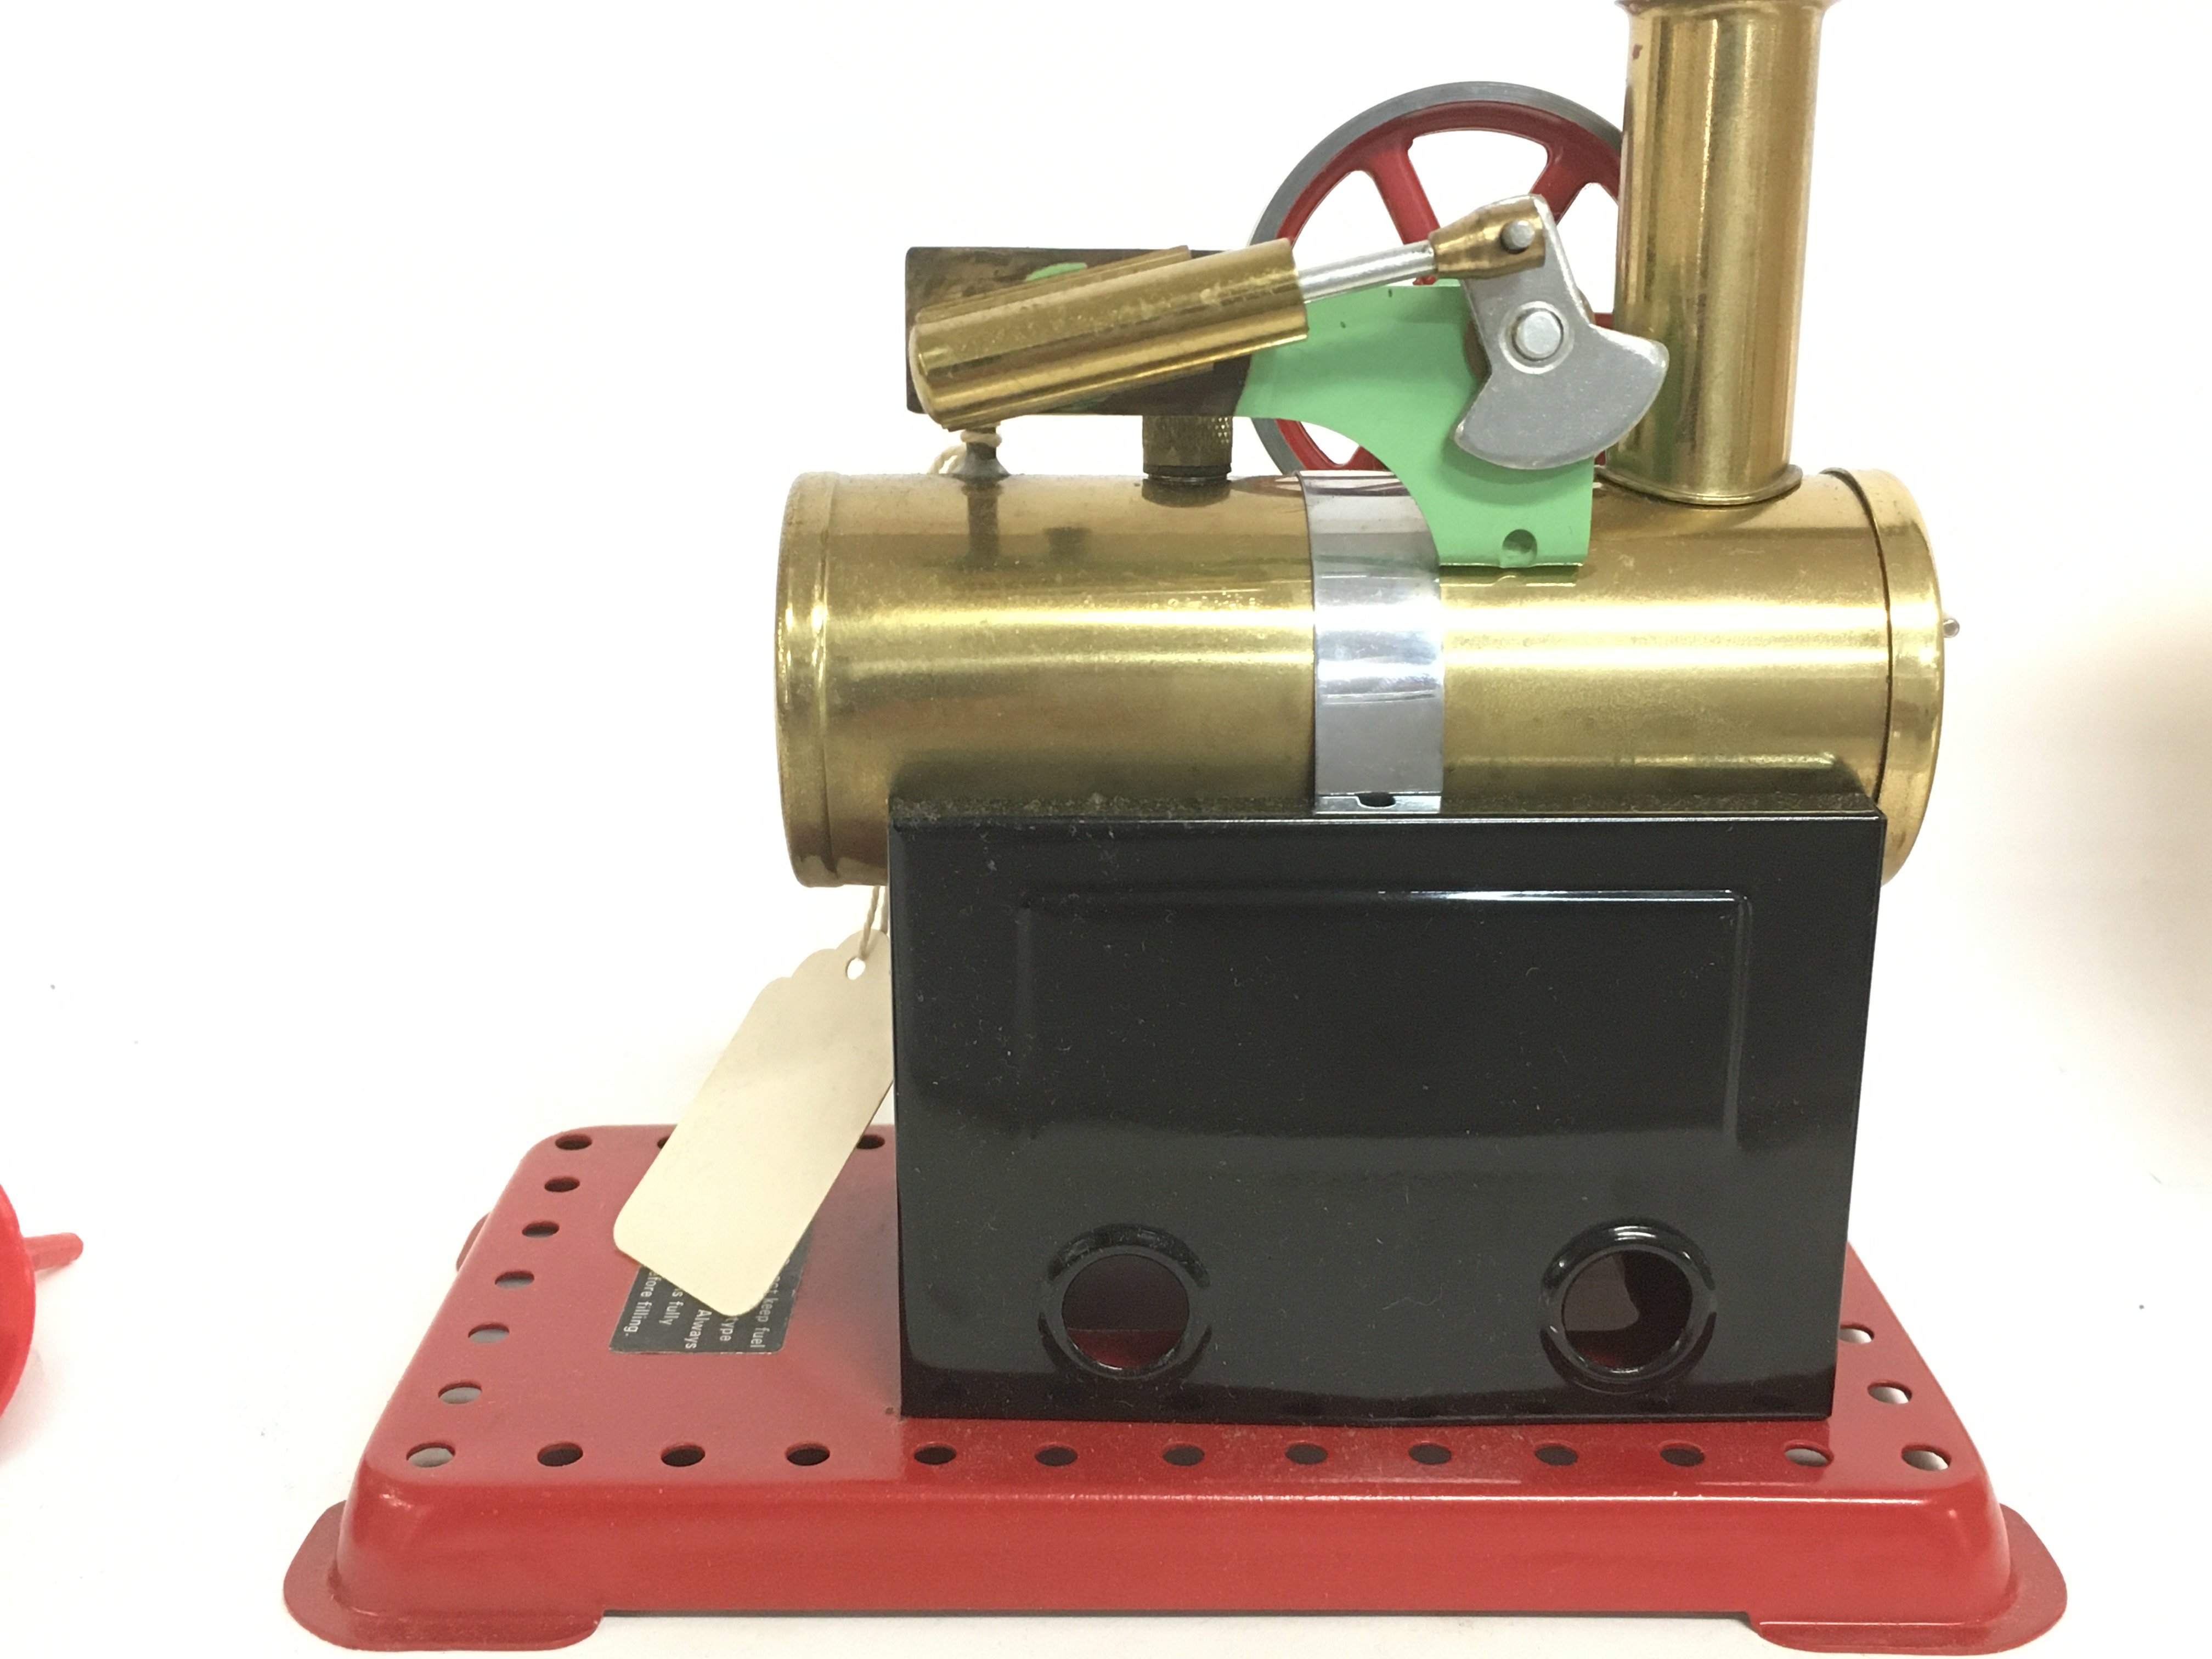 A Boxed Mamod Minor 2 Steam Engine, postage catego - Image 3 of 3